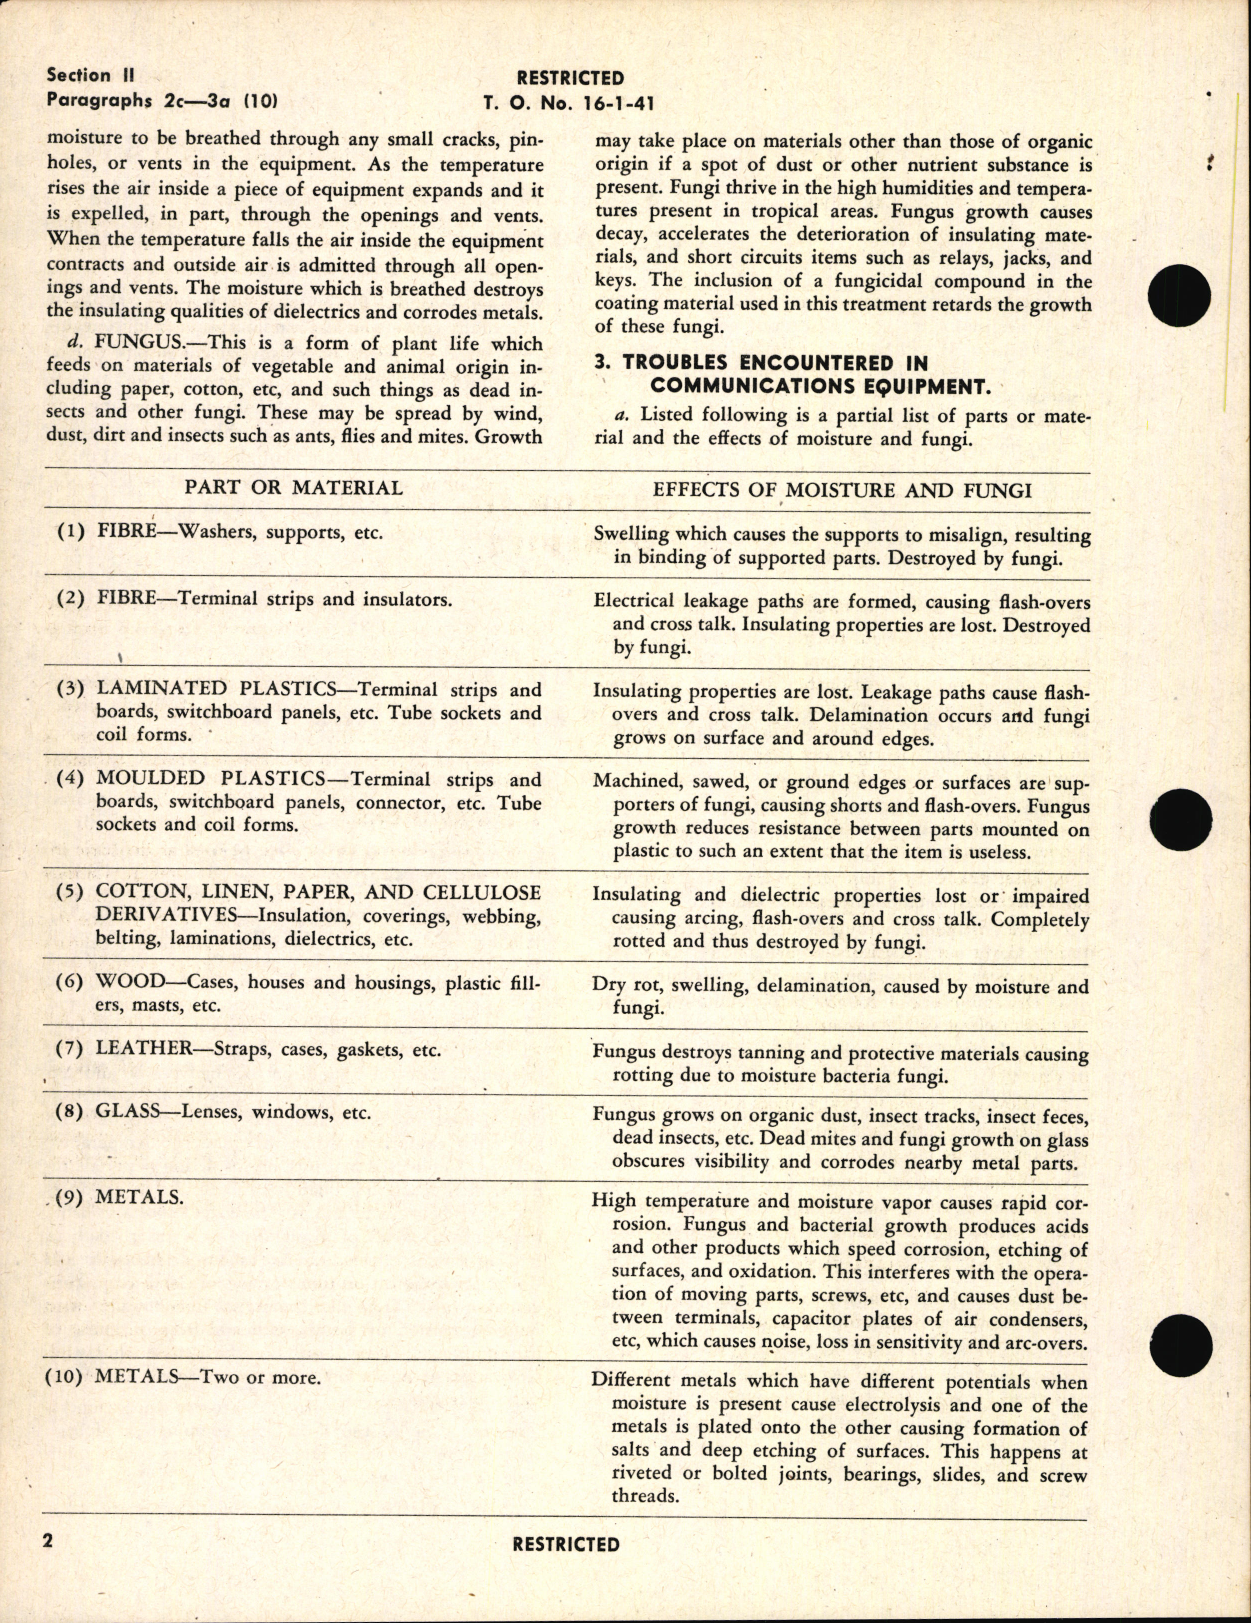 Sample page 6 from AirCorps Library document: General Instructions for Tropicalization of Communications Equipment